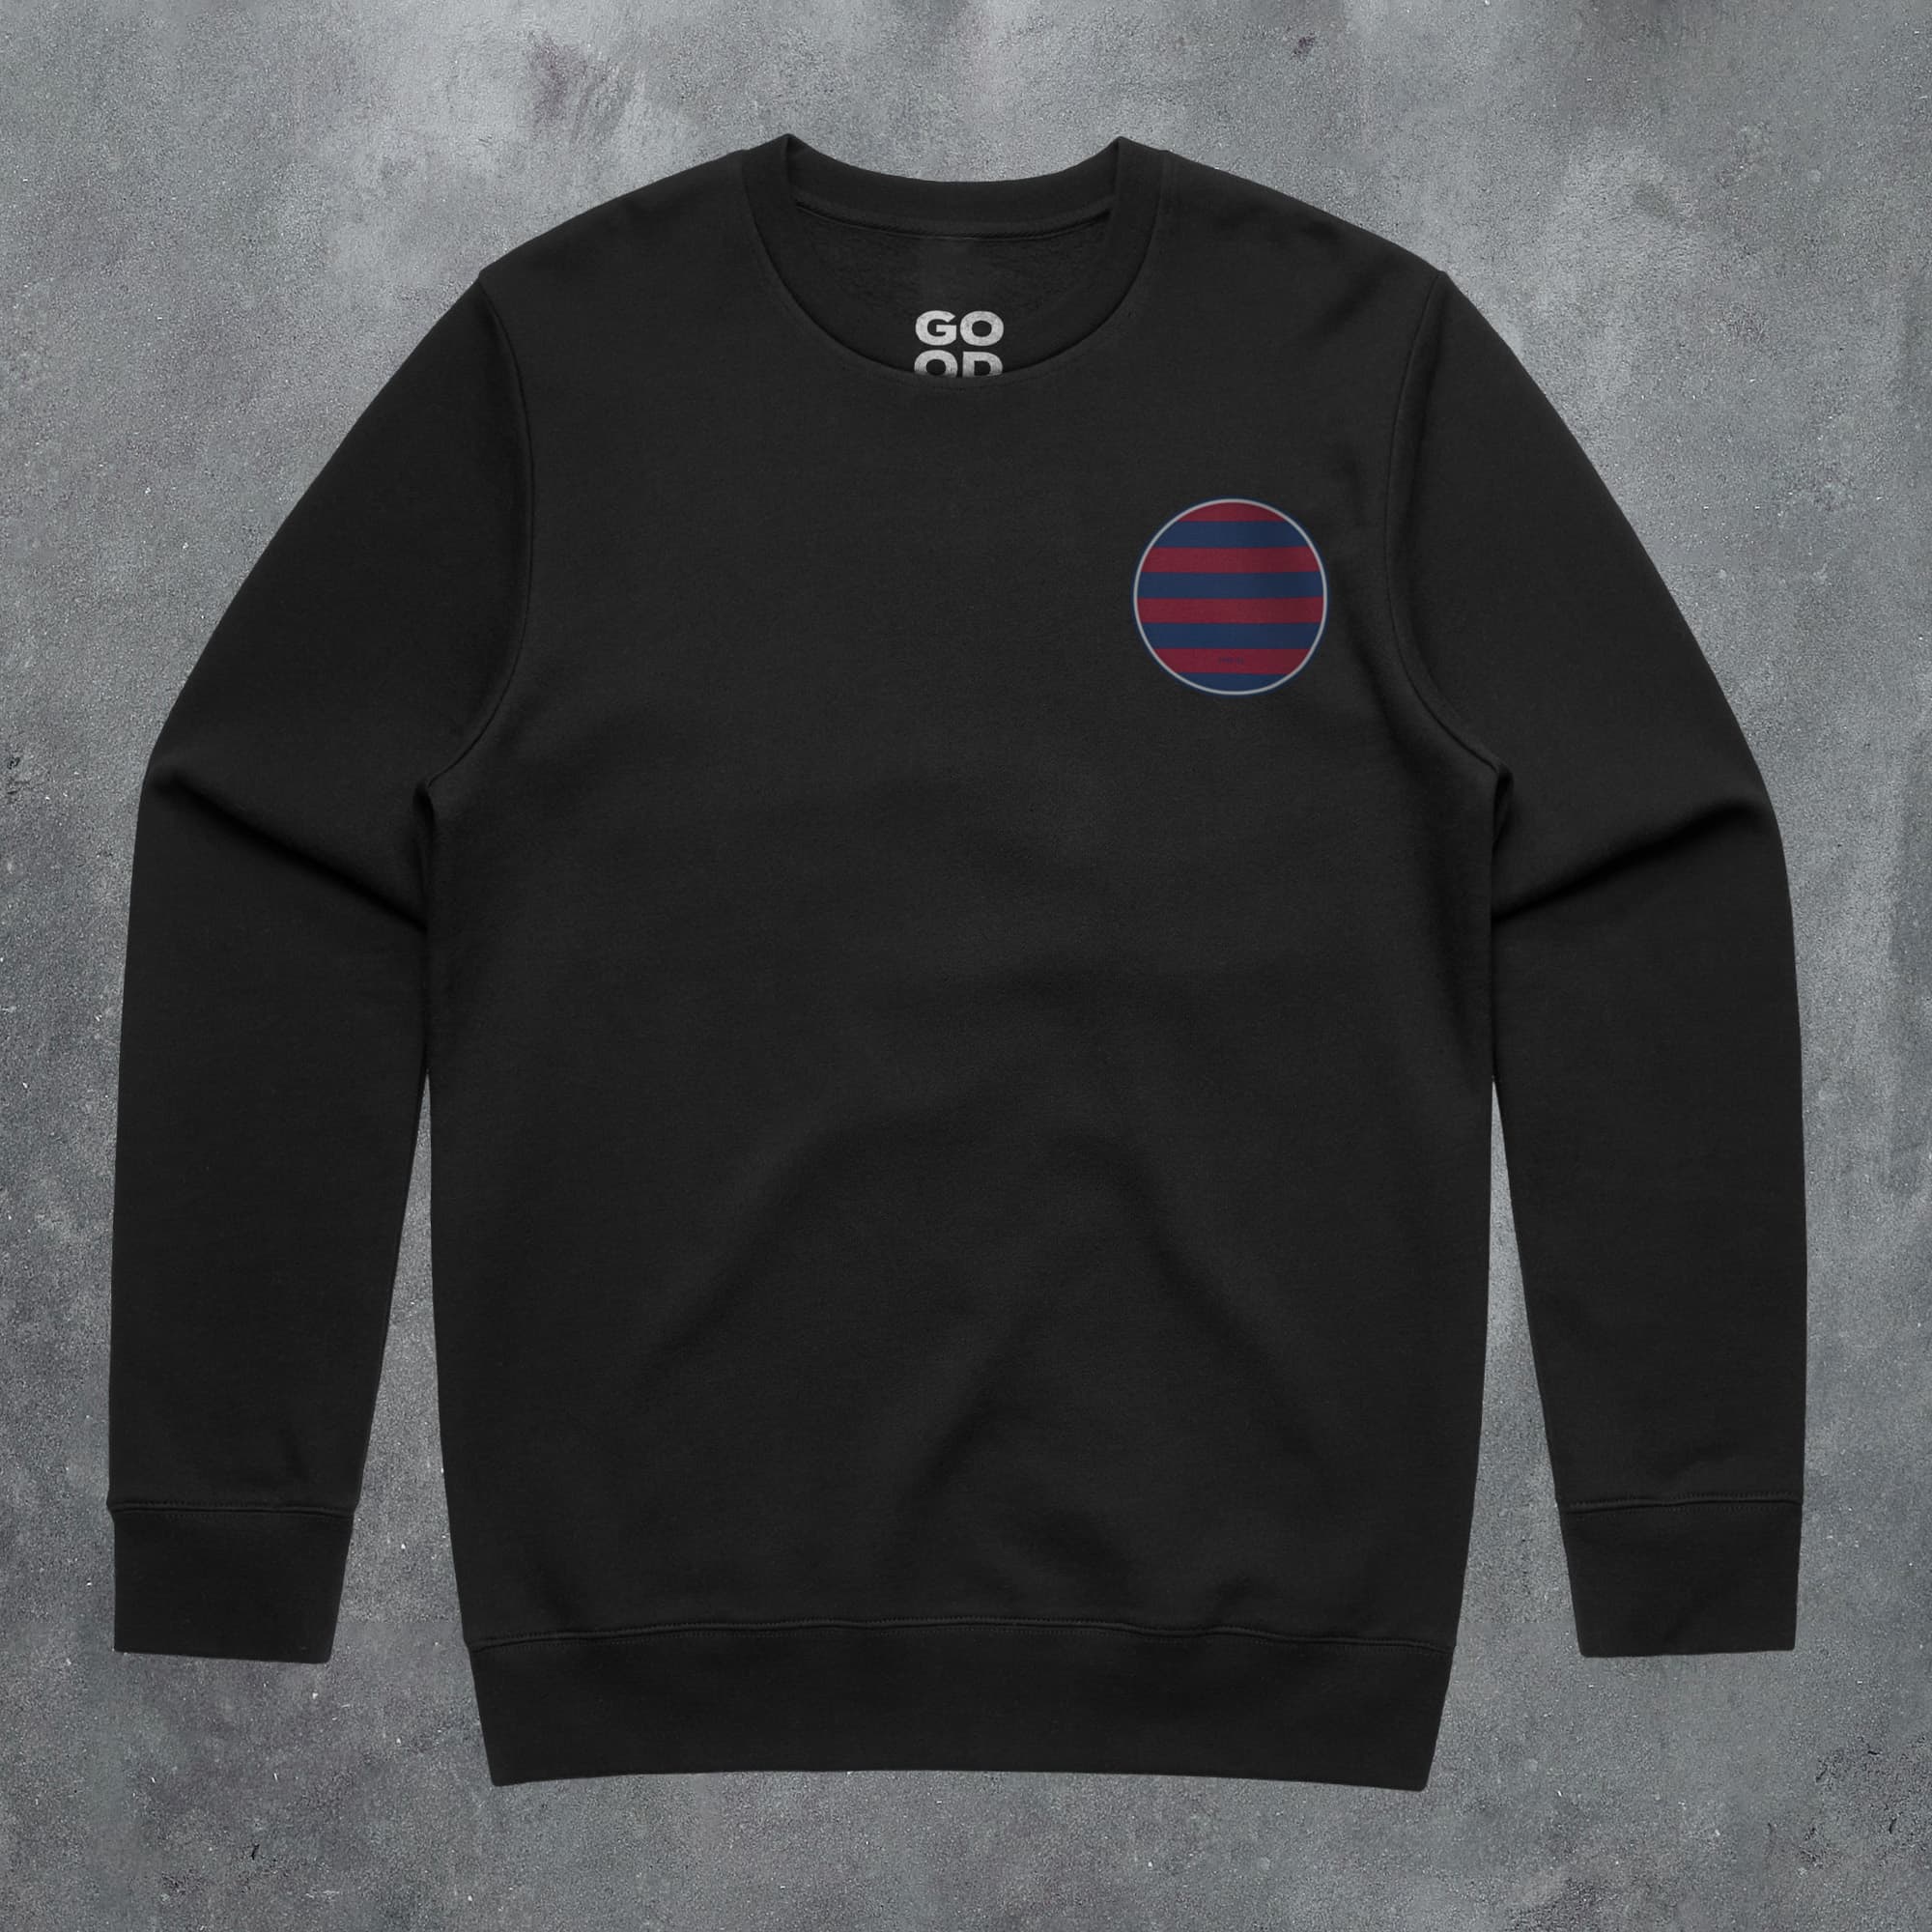 a black sweatshirt with a red and blue circle on it